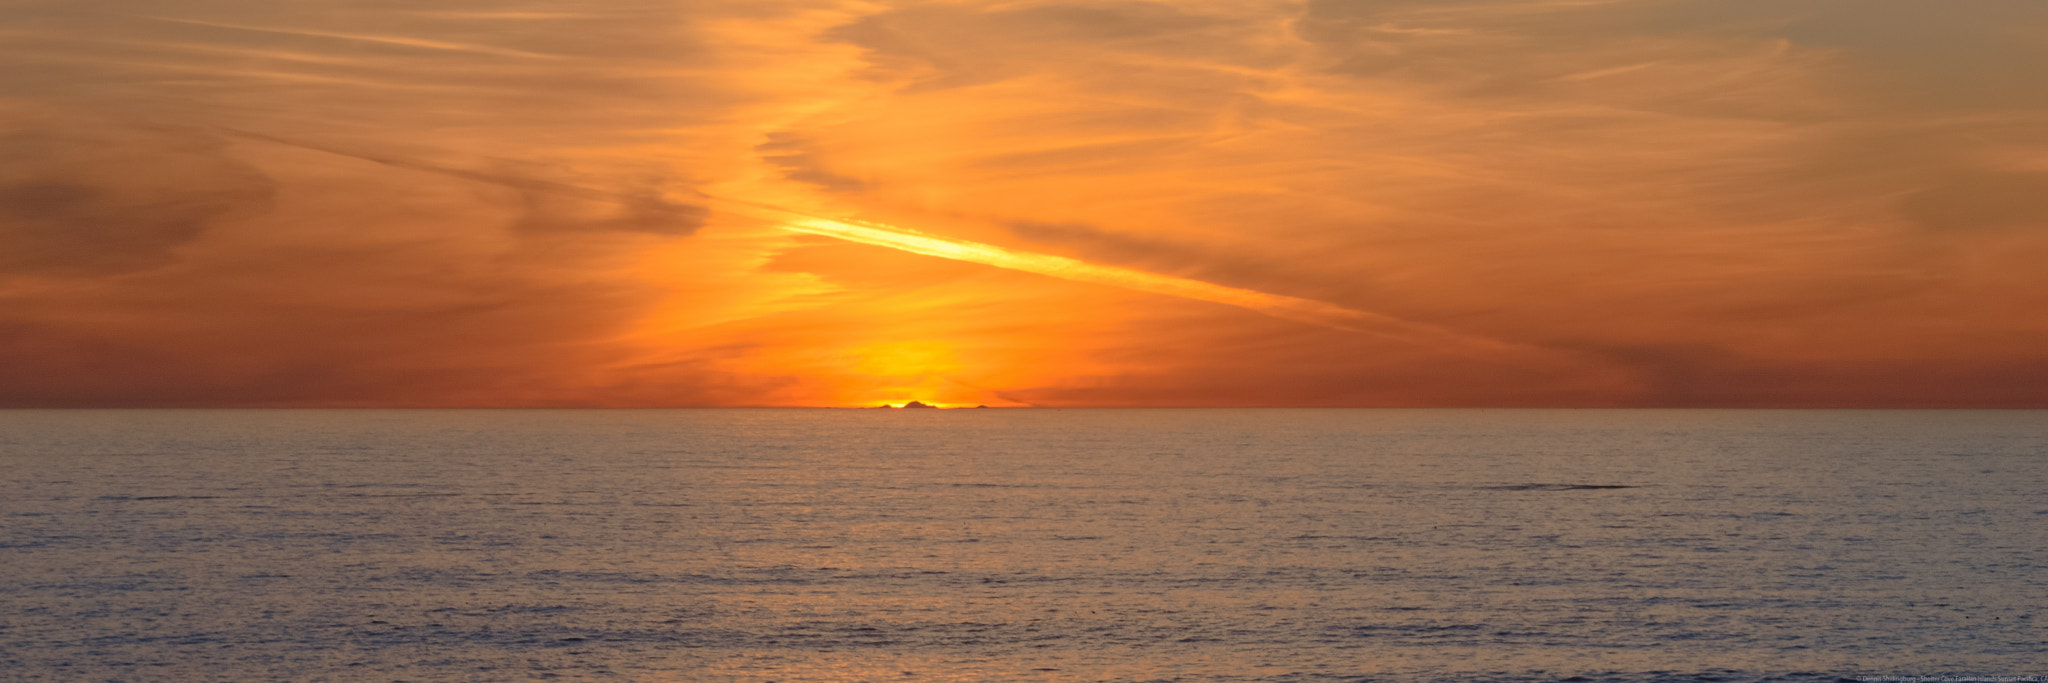 Nikon D5300 sample photo. Pacific ocean sunset layered clouds photography